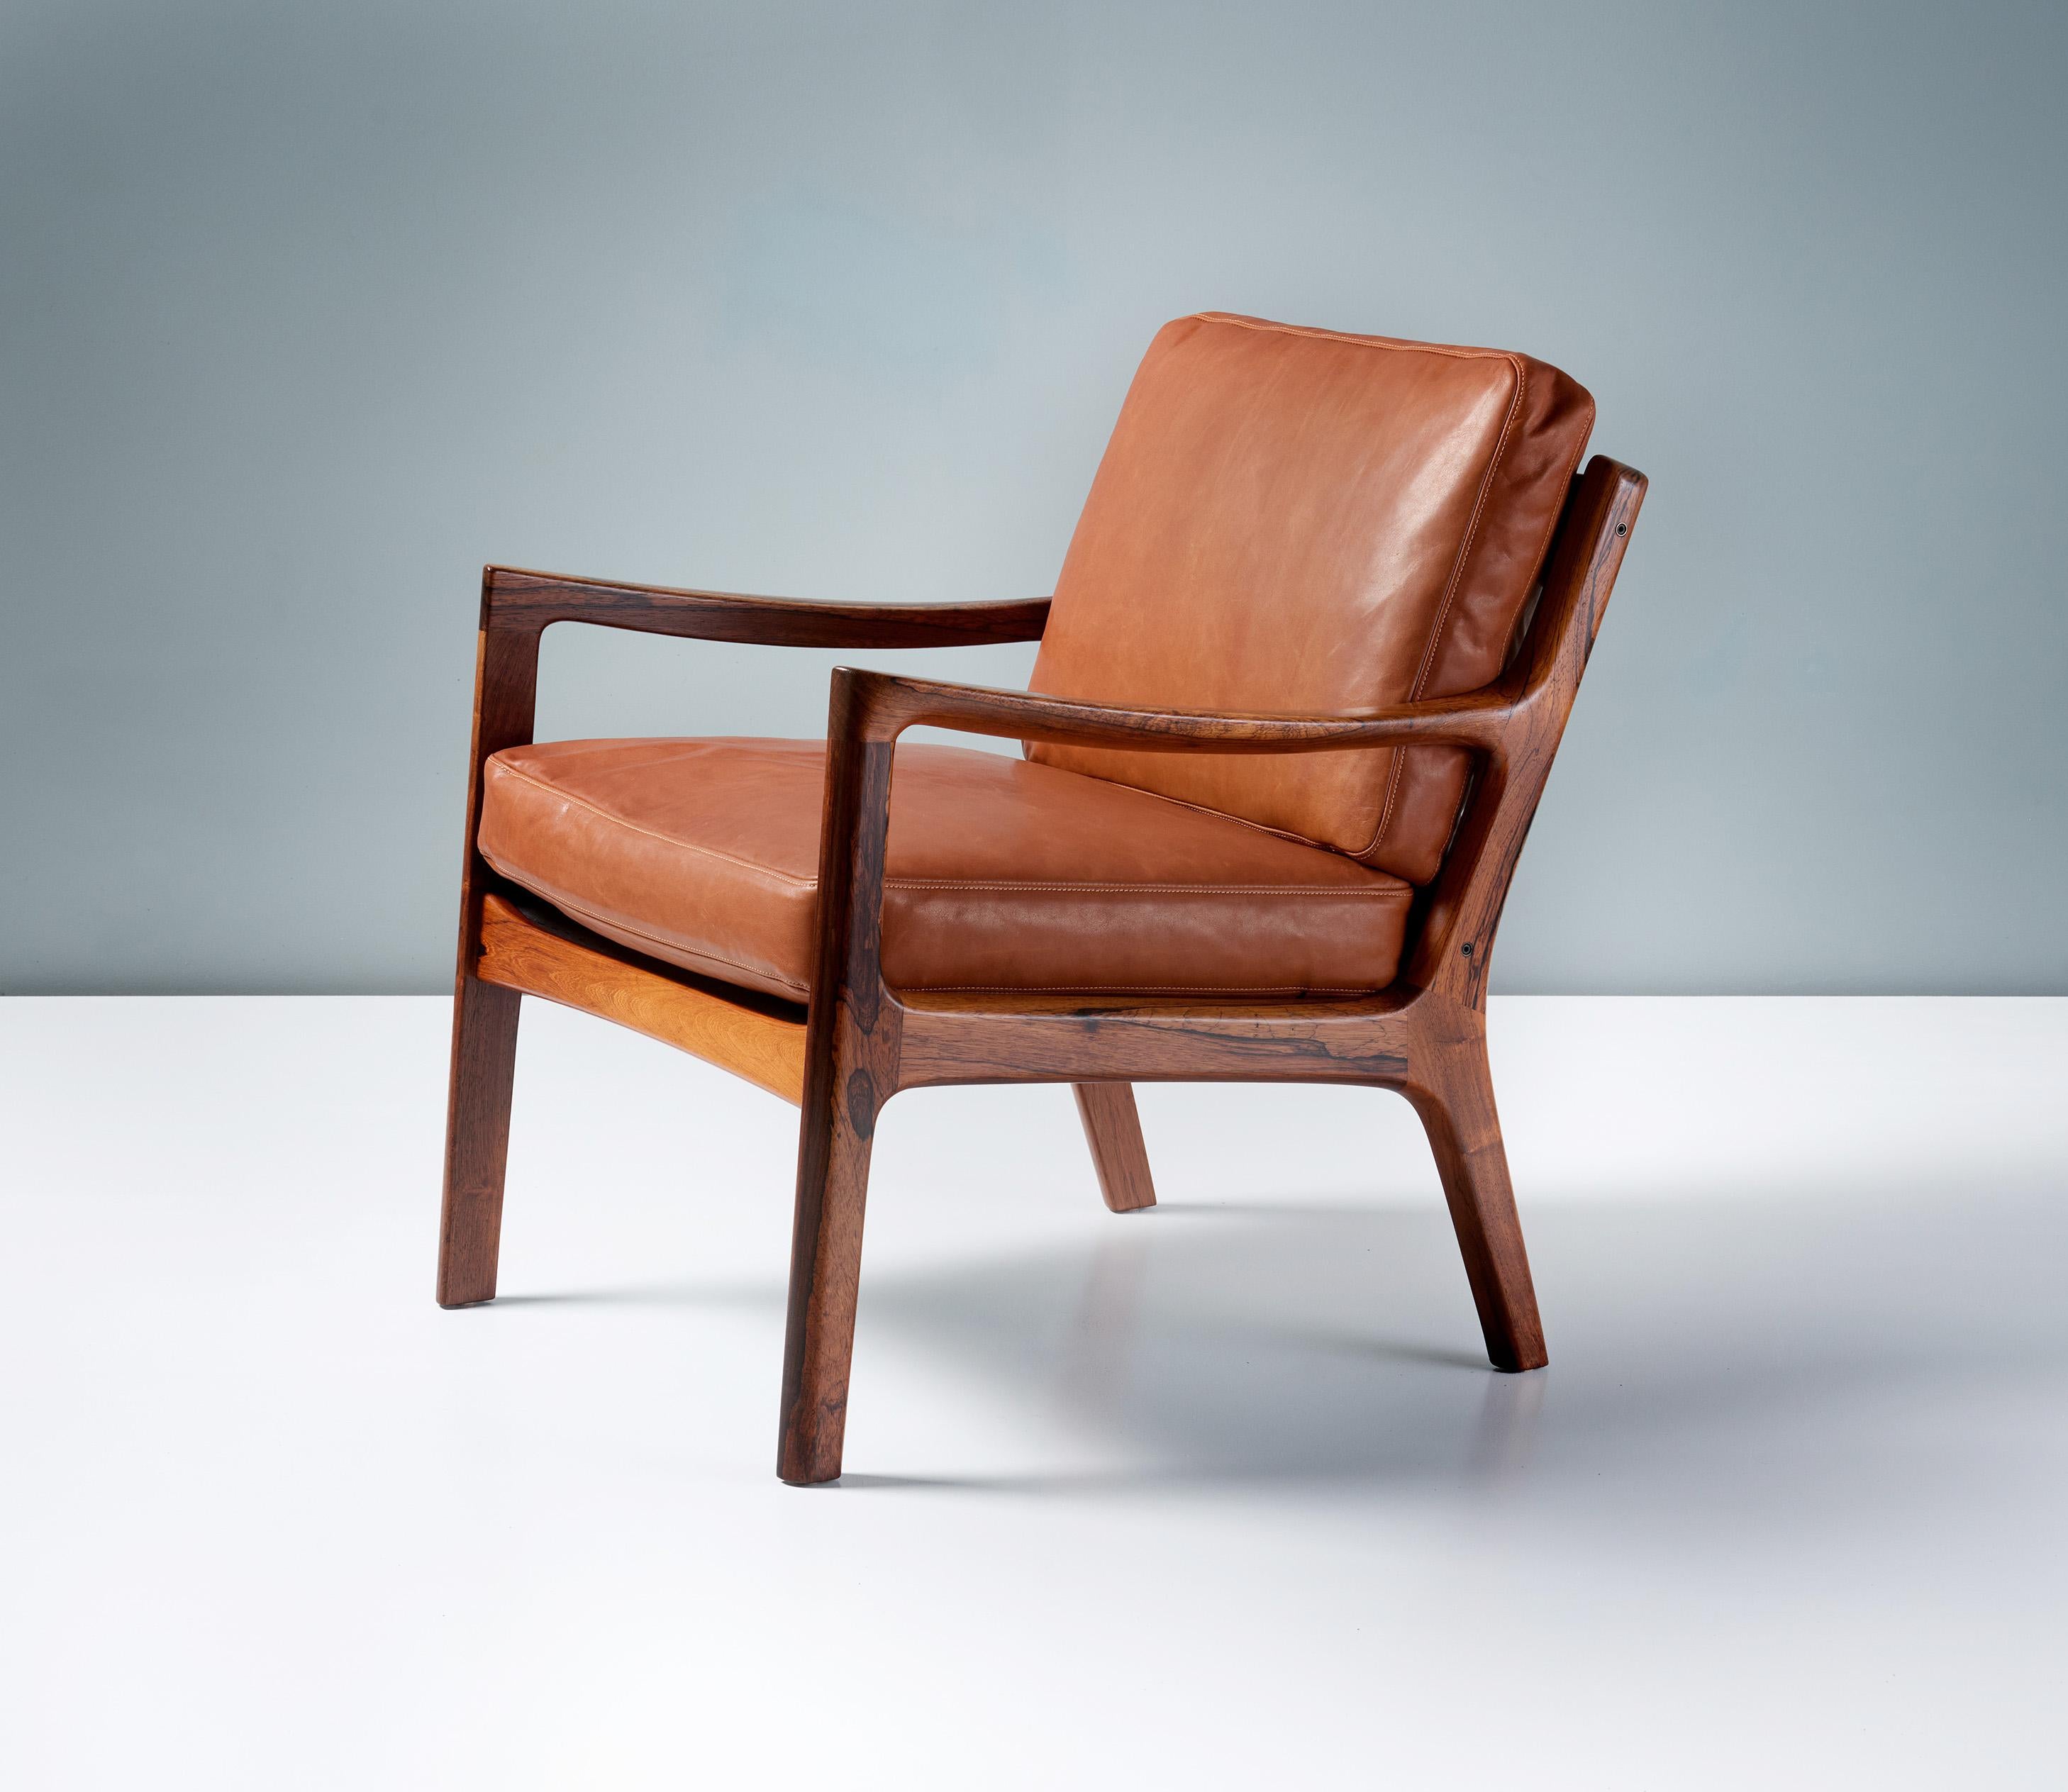 Ole Wanscher - Senator Lounge Chair, c1960s

The Senator series of chair, sofa and rocking chair was produced as part of Wanscher's late career collaboration of more minimal and modernist designs for producer France & Daverkosen (France & Son). This